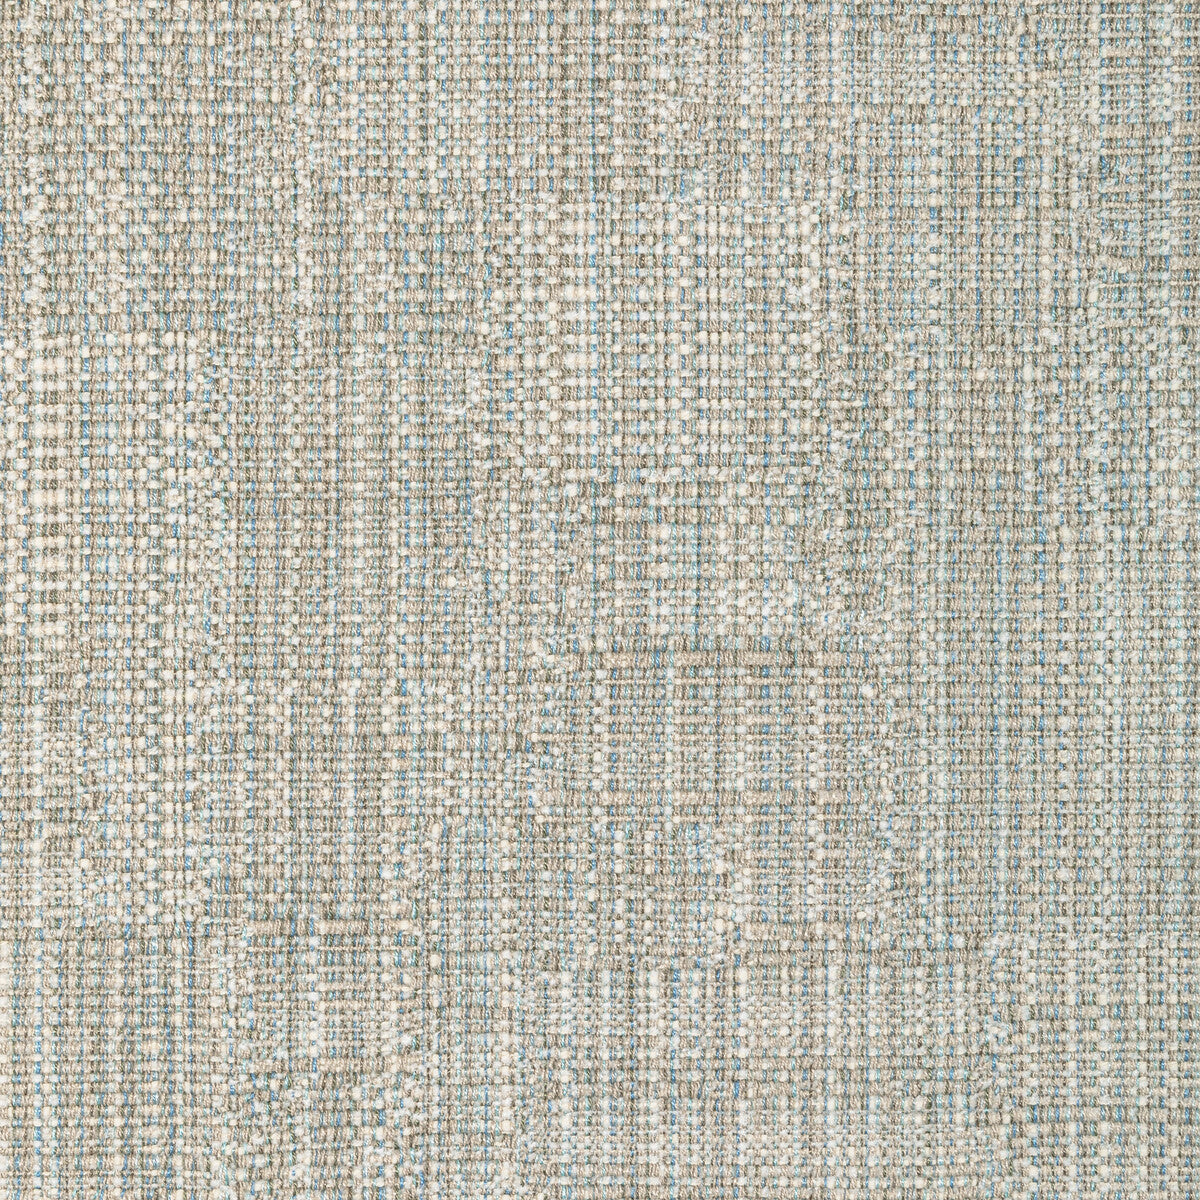 Seedbed fabric in celeste color - pattern 36385.511.0 - by Kravet Couture in the Barbara Barry Ojai collection